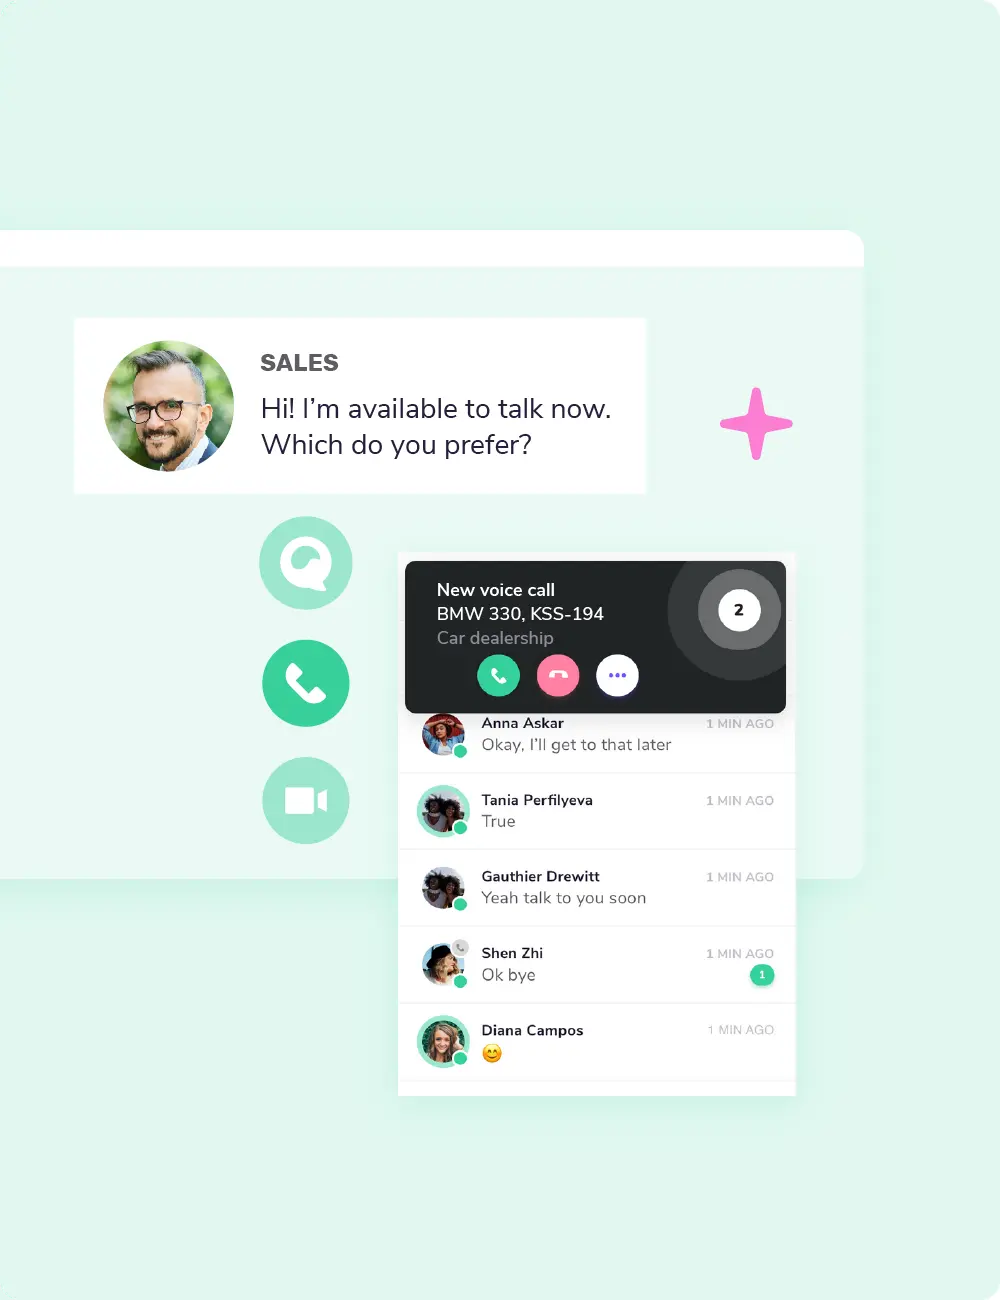 Switch between voice, video, and chat with giosg